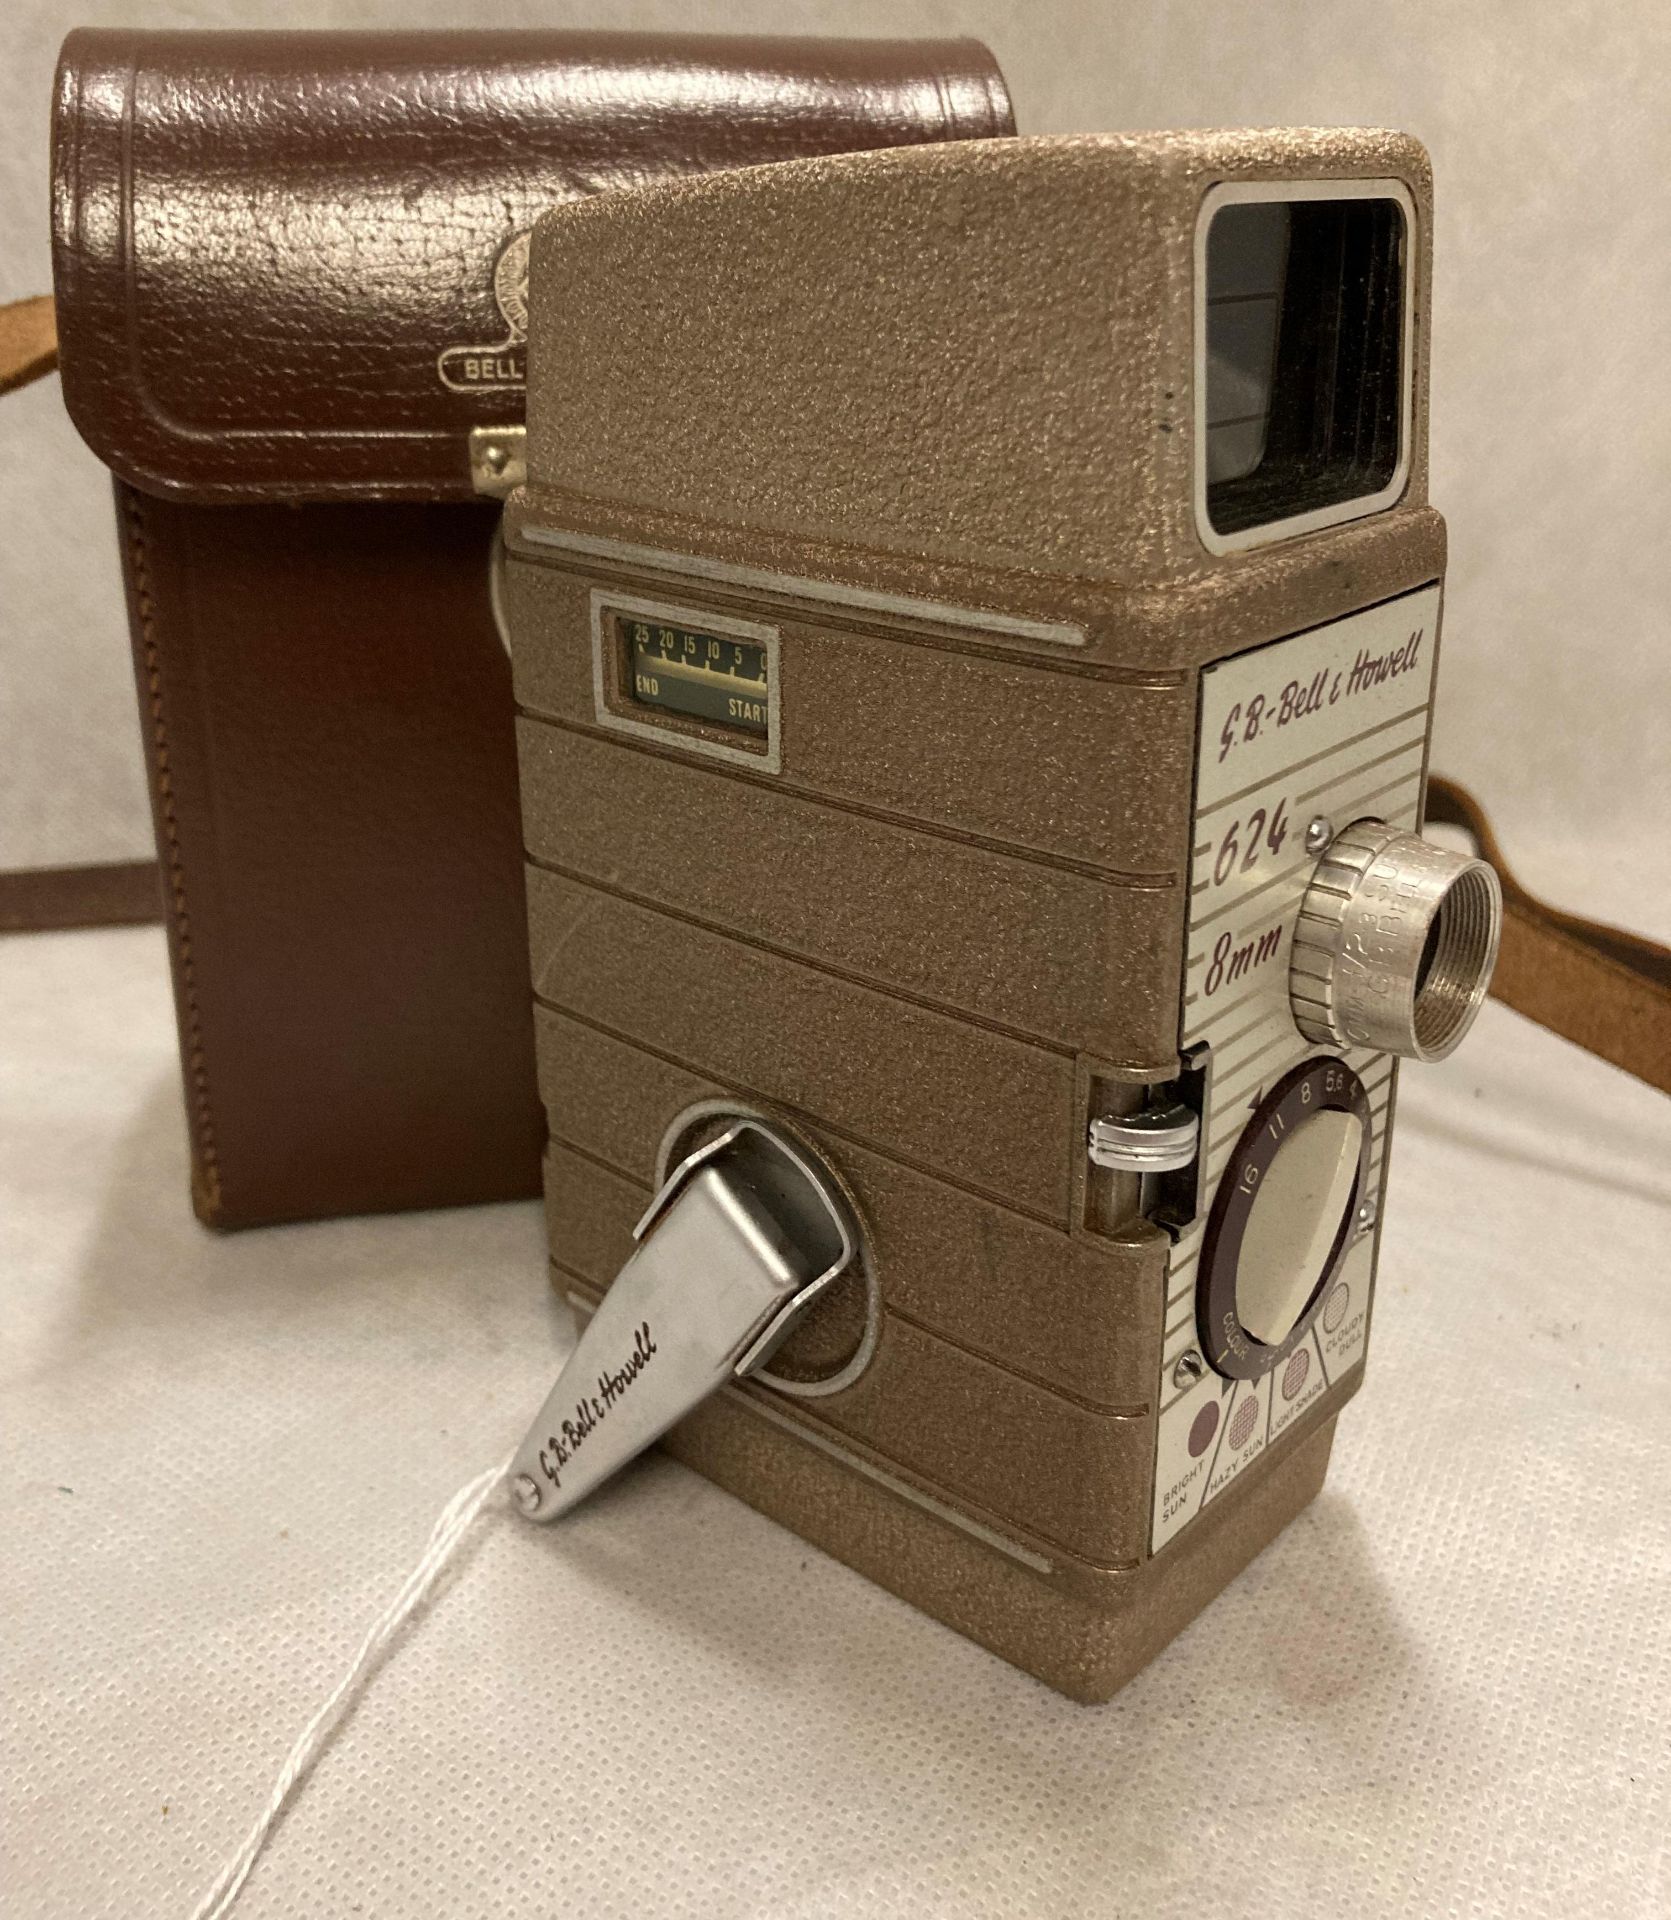 A Bell & Howell 624 8mm cine camera in brown case